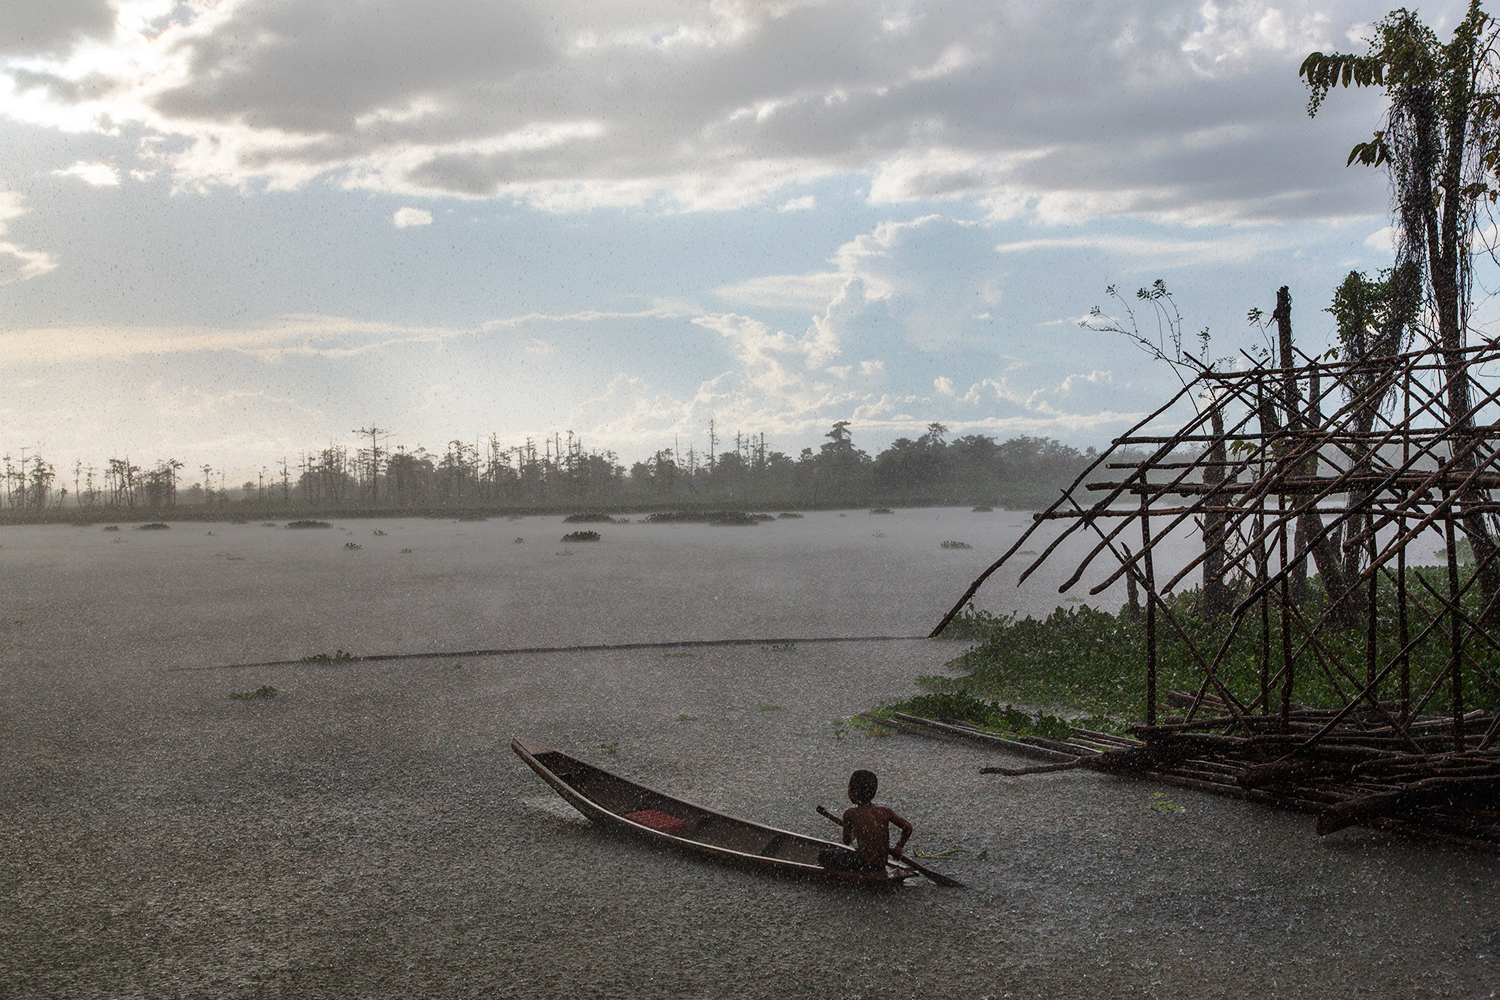  A young Monobo boy guides his canoe through an unexpected rainfall in a community floating village in the middle of Agusan Marsh, Mindanao in the Philippines. 